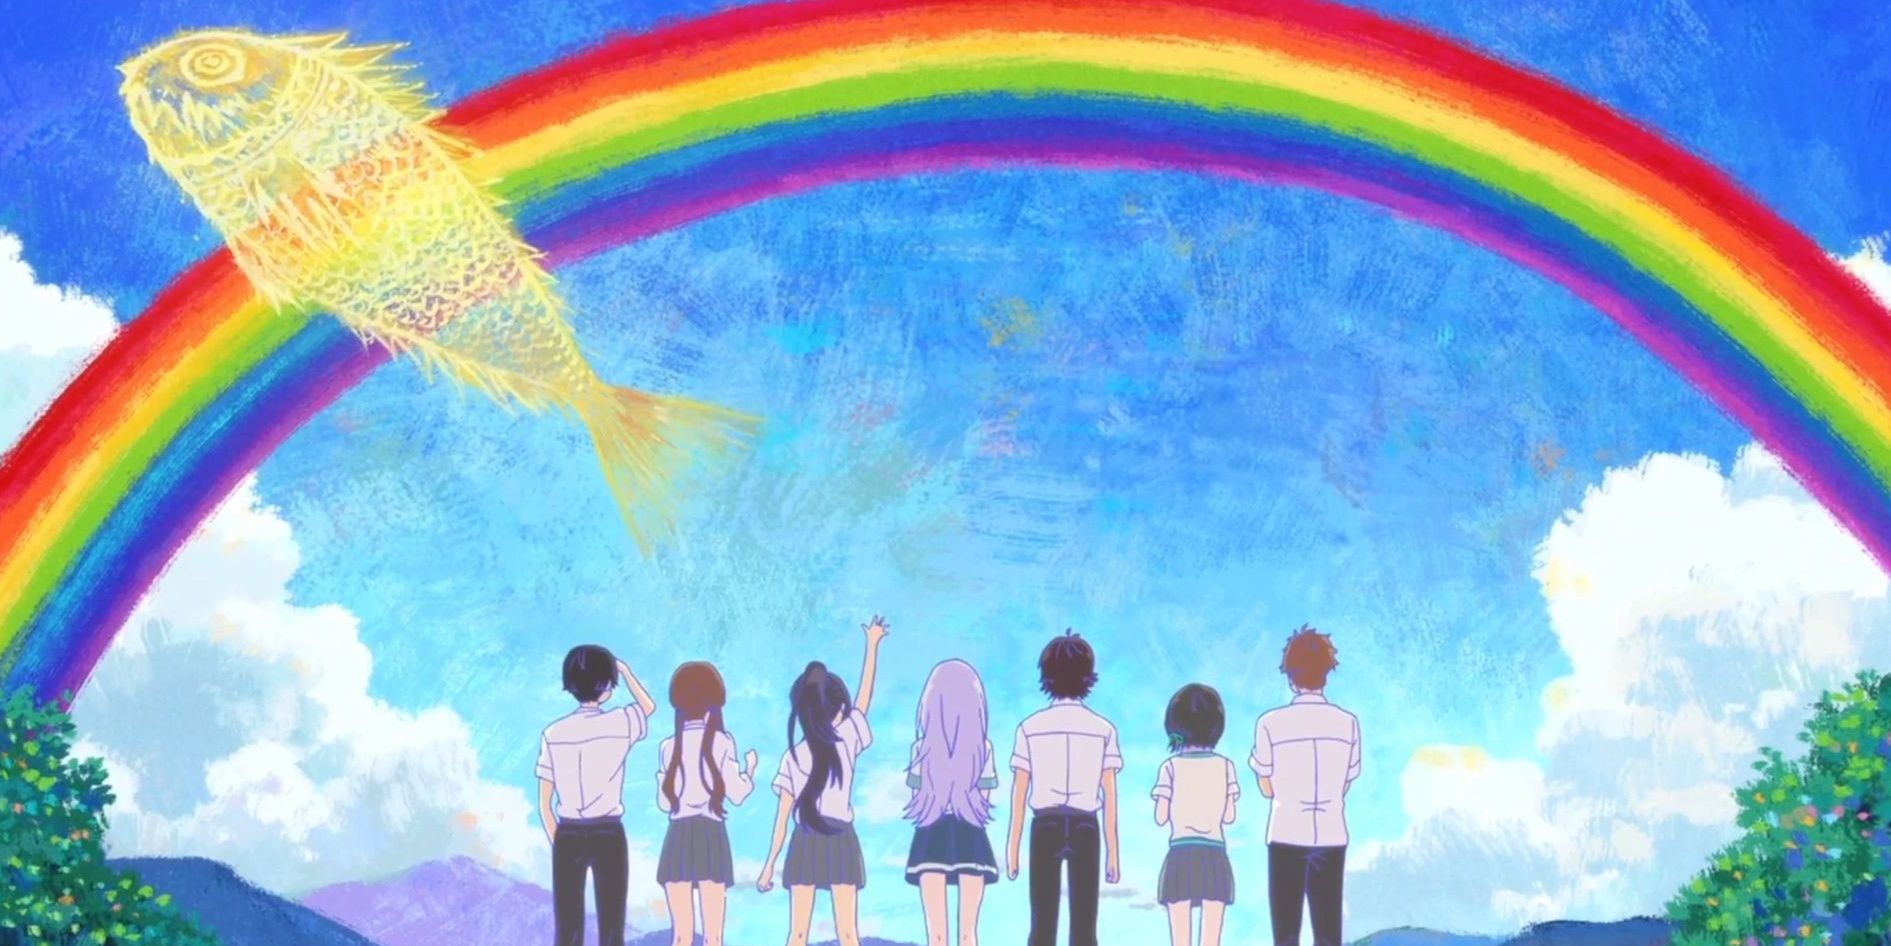 Hitomi and the rest of the main cast of Iroduku stare up at a bright rainbow in the sky